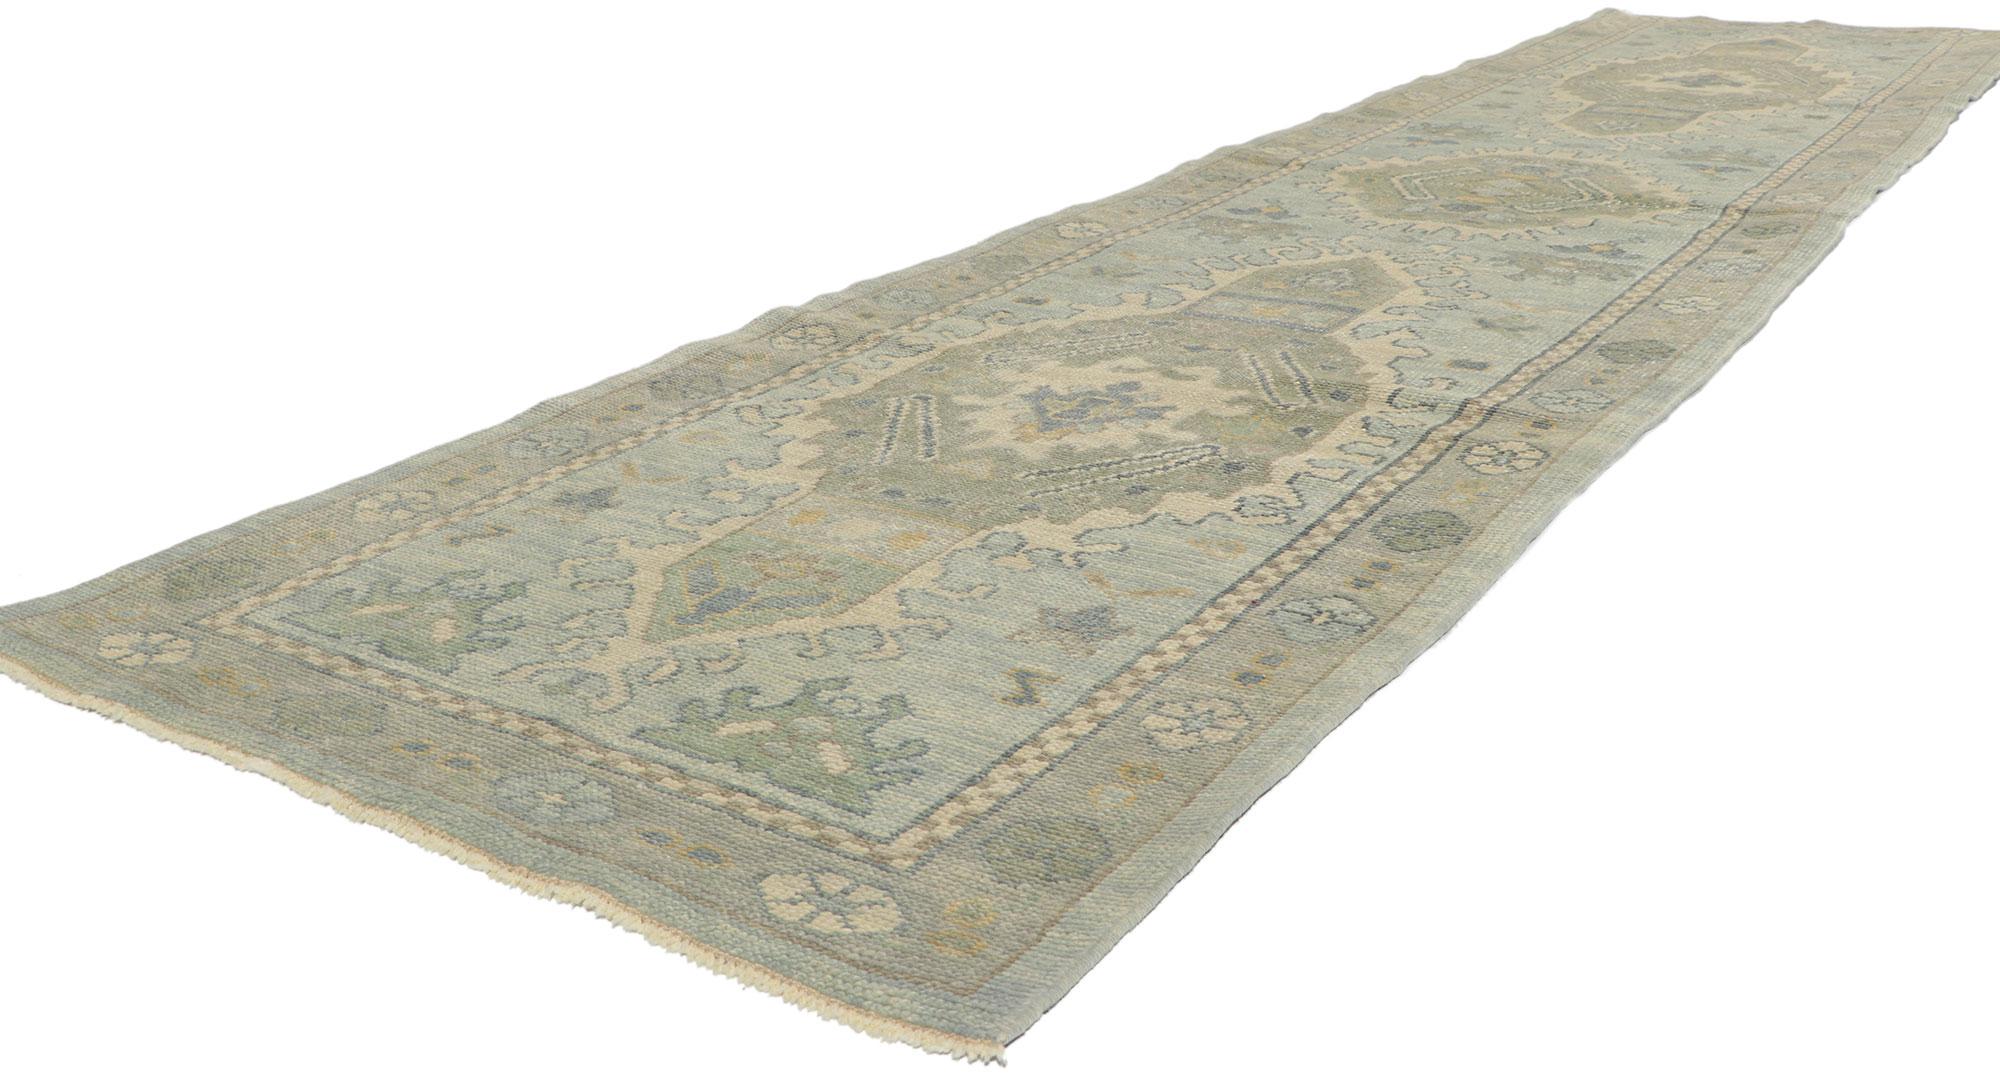 53809 New Contemporary Turkish Oushak Hallway runner with Modern Style 03'01 x 13'04. This hand-knotted wool contemporary Turkish Oushak runner features a geometric pattern composed of an array of botanical motifs and ambiguous Anatolian motifs